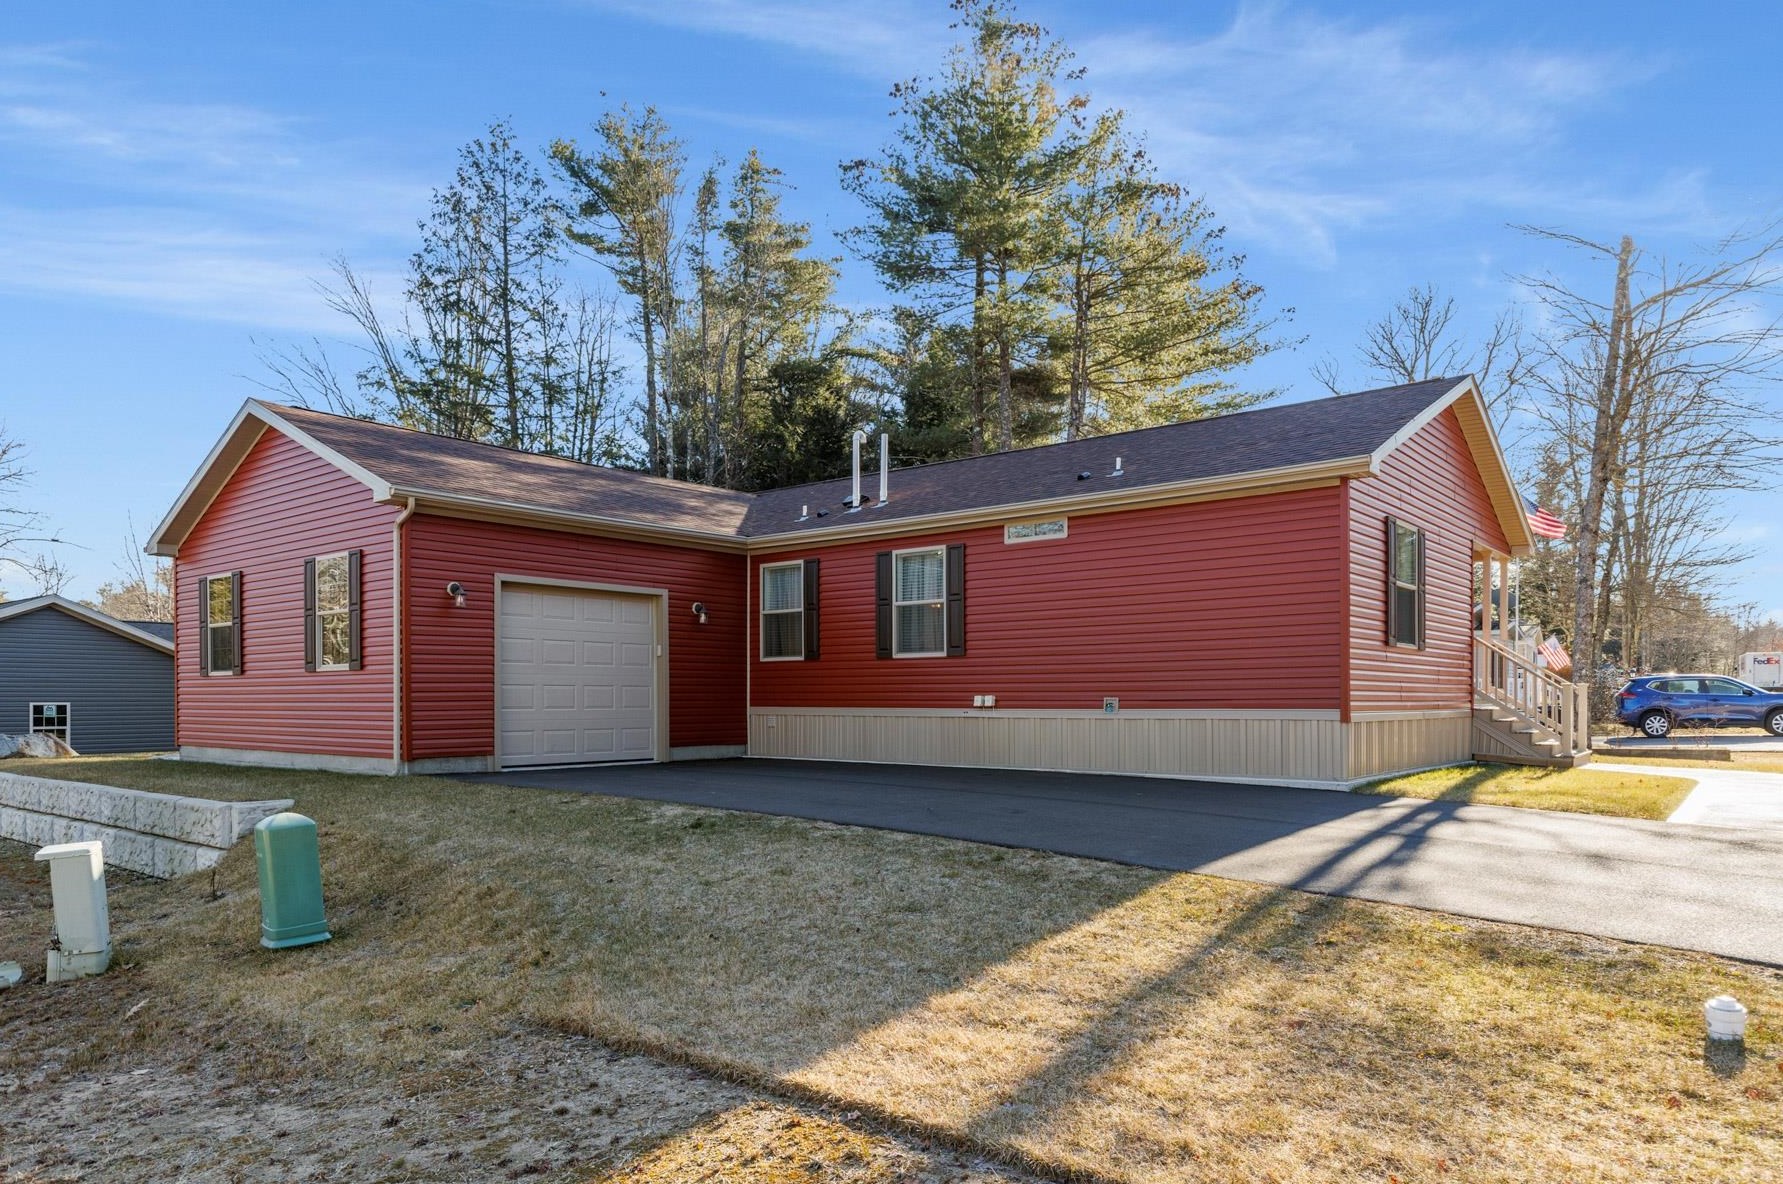 77 Eagle Dr, Rochester, NH 03868